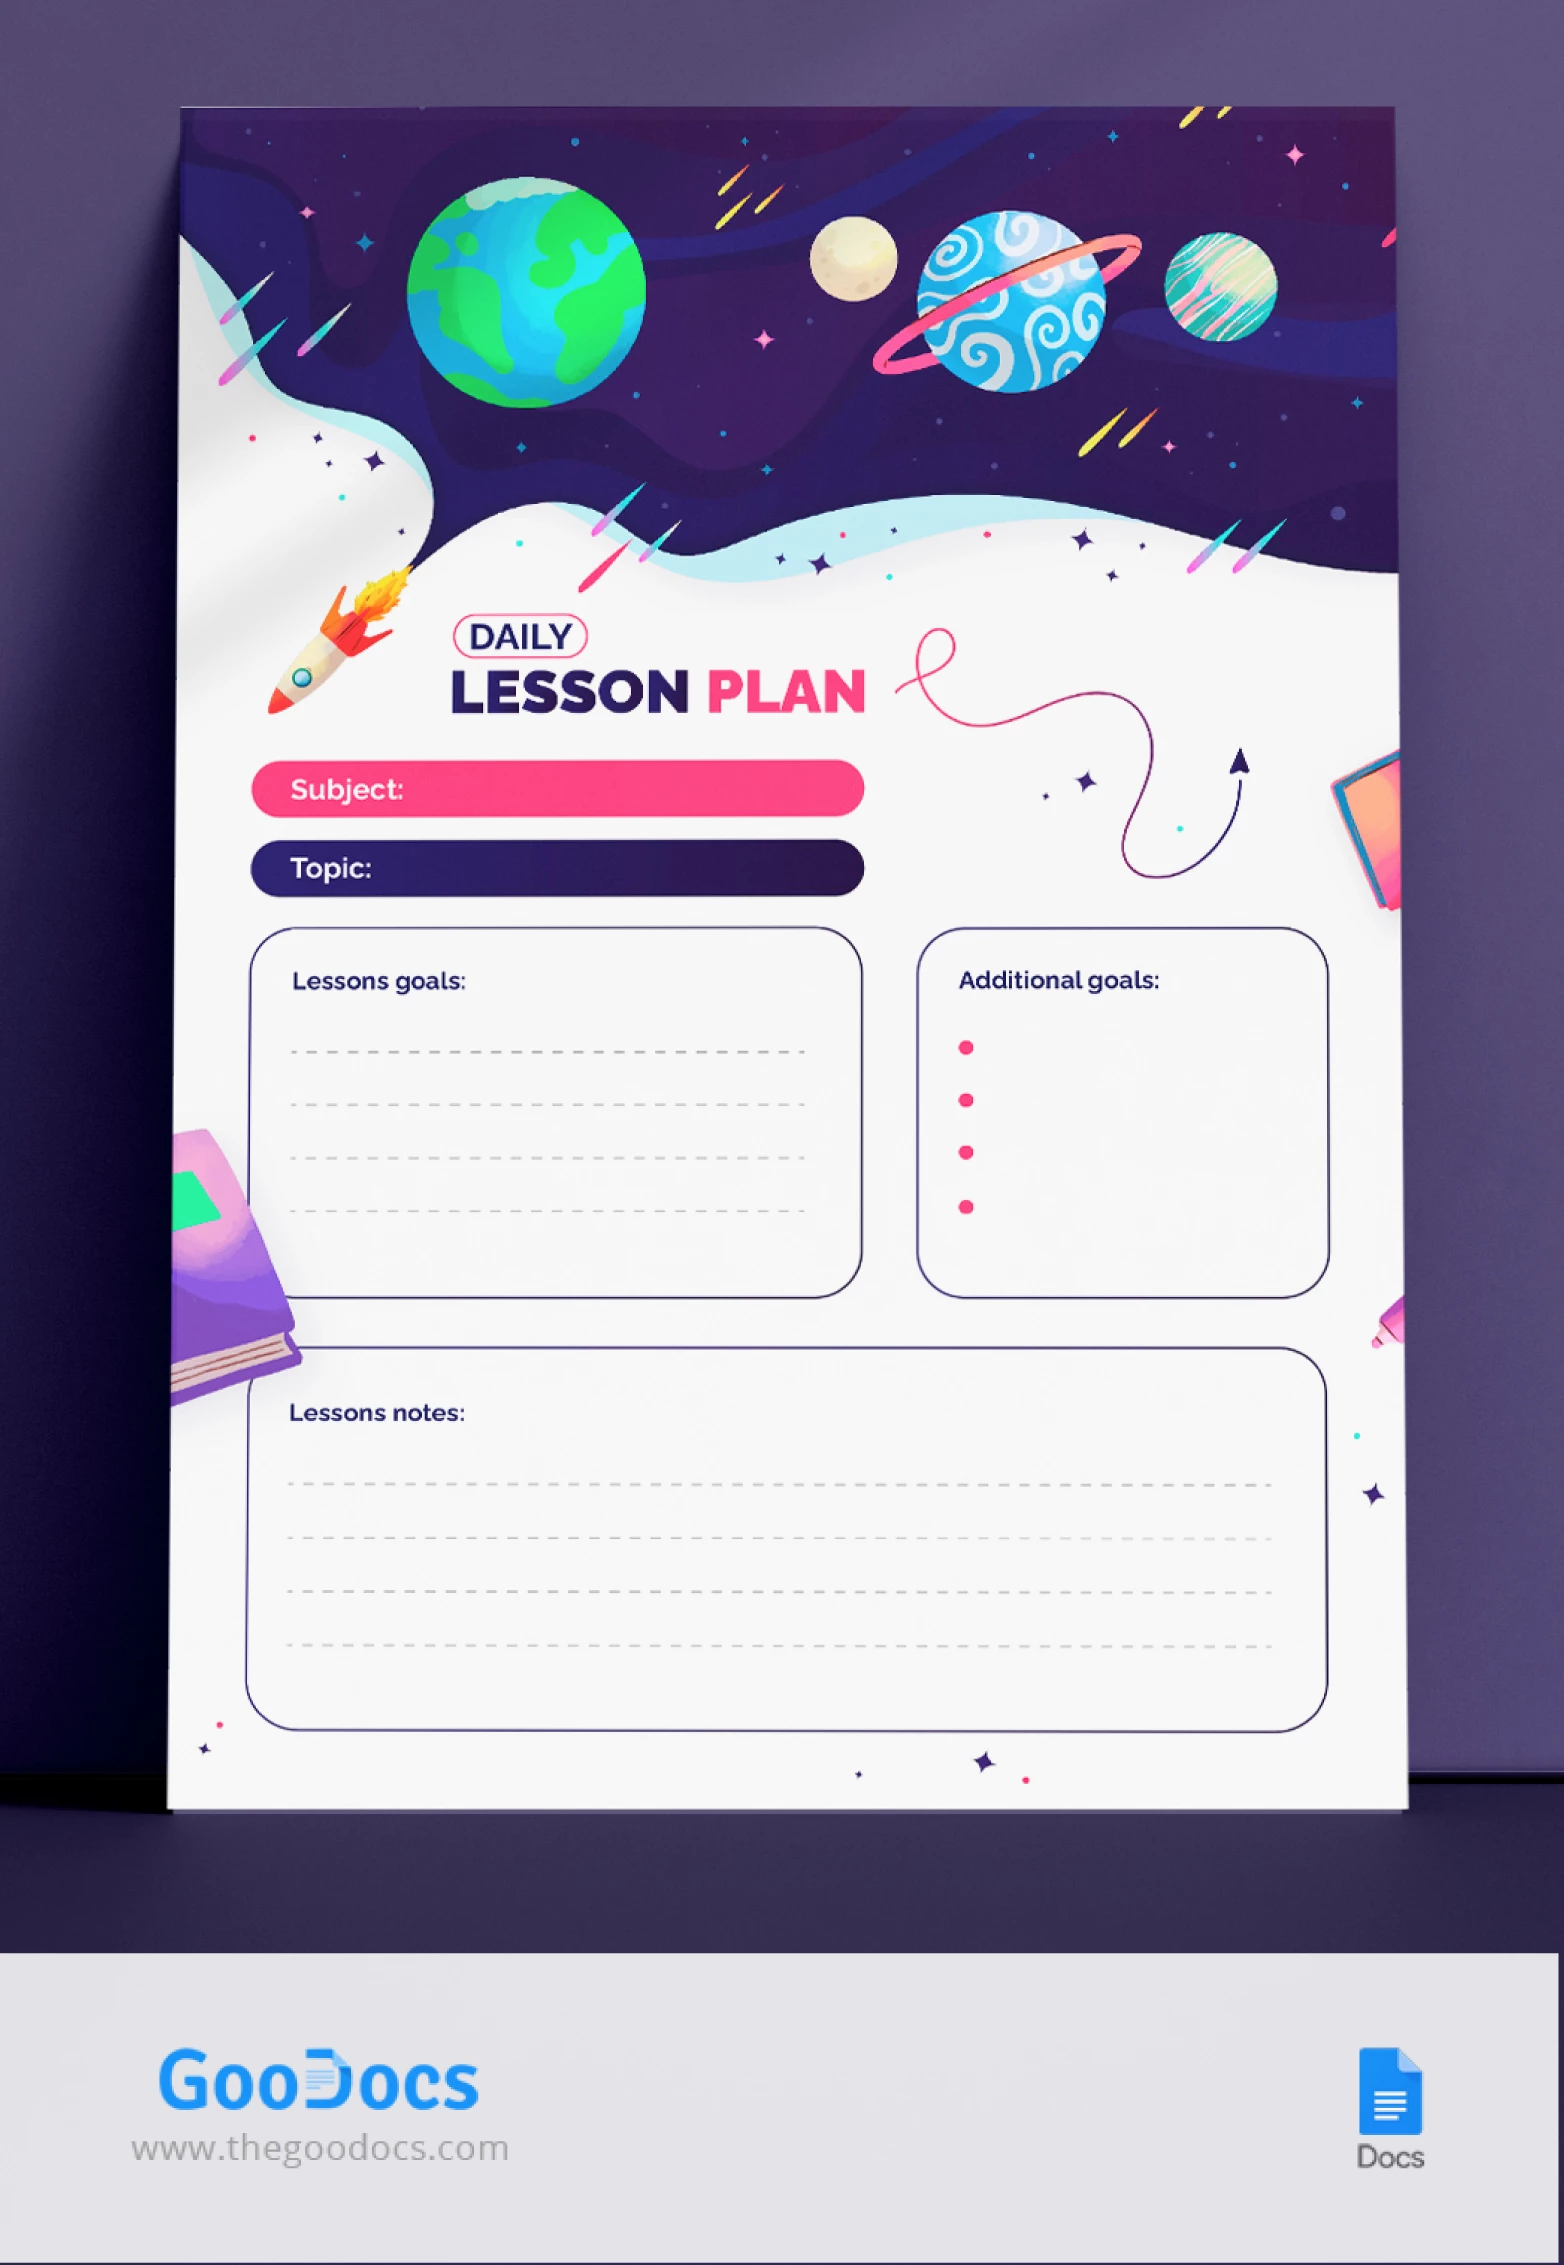 Daily Lesson Plan - free Google Docs Template - 10067805